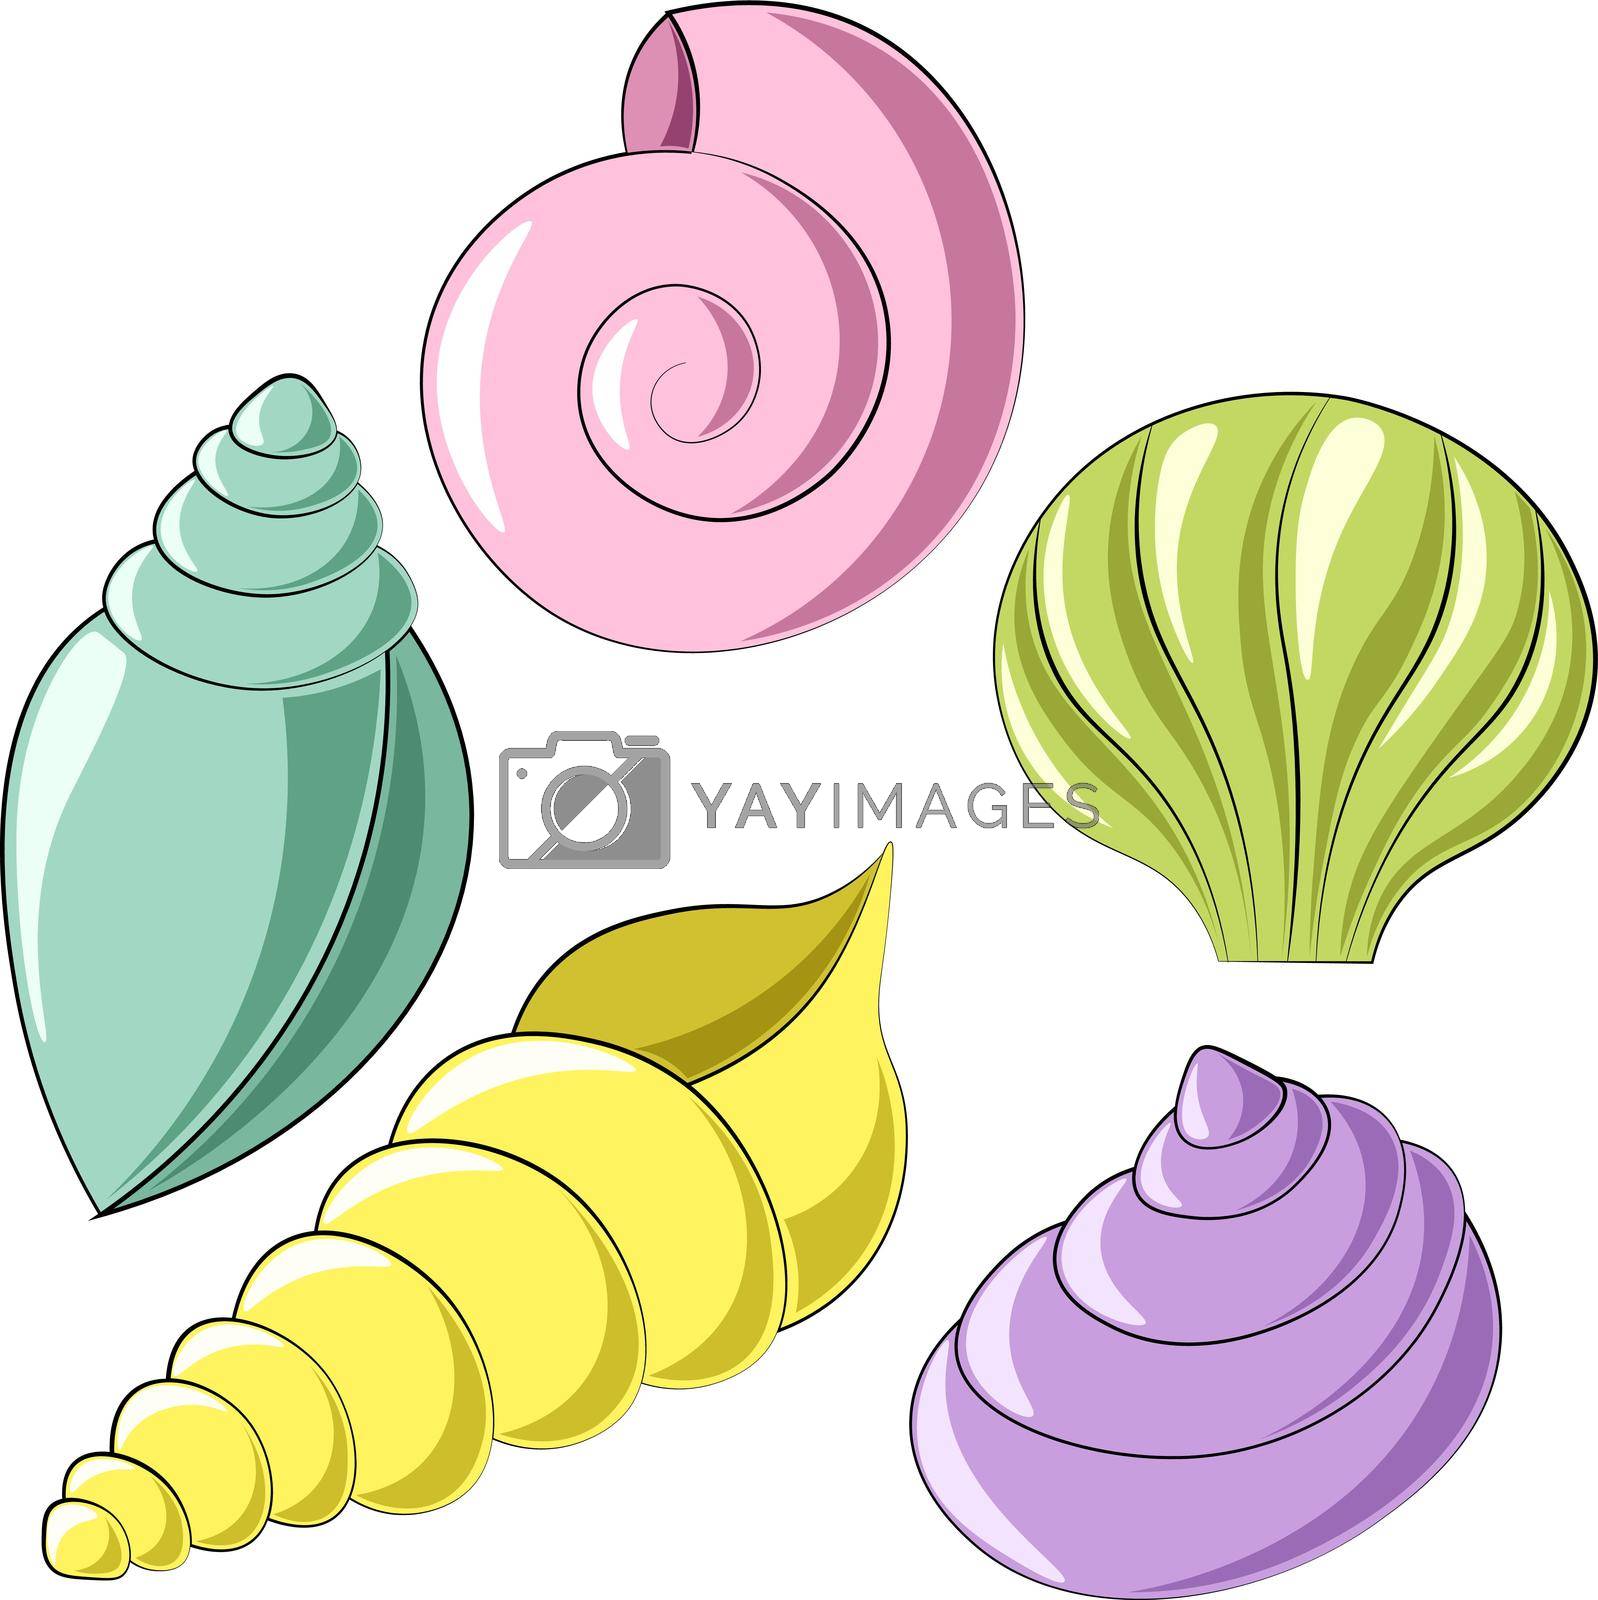 Royalty free image of Mini set Seashells. Draw illustration in color by AnastasiaPen